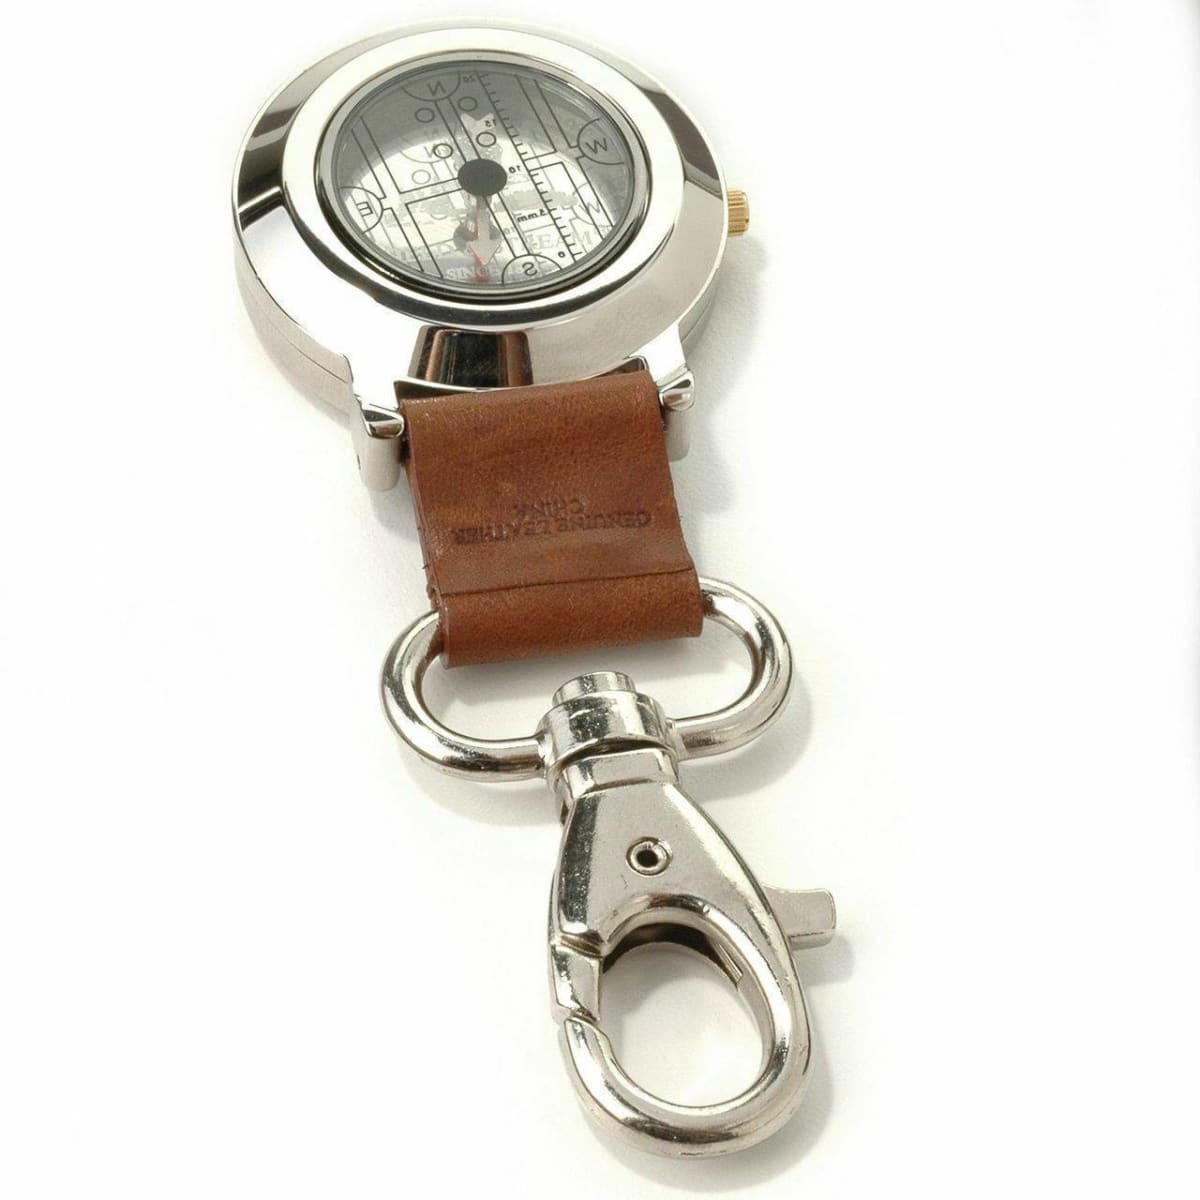 Field & Stream Camp Master Green Dial Multi-Function Compass Leather Pocket Watch - On sale